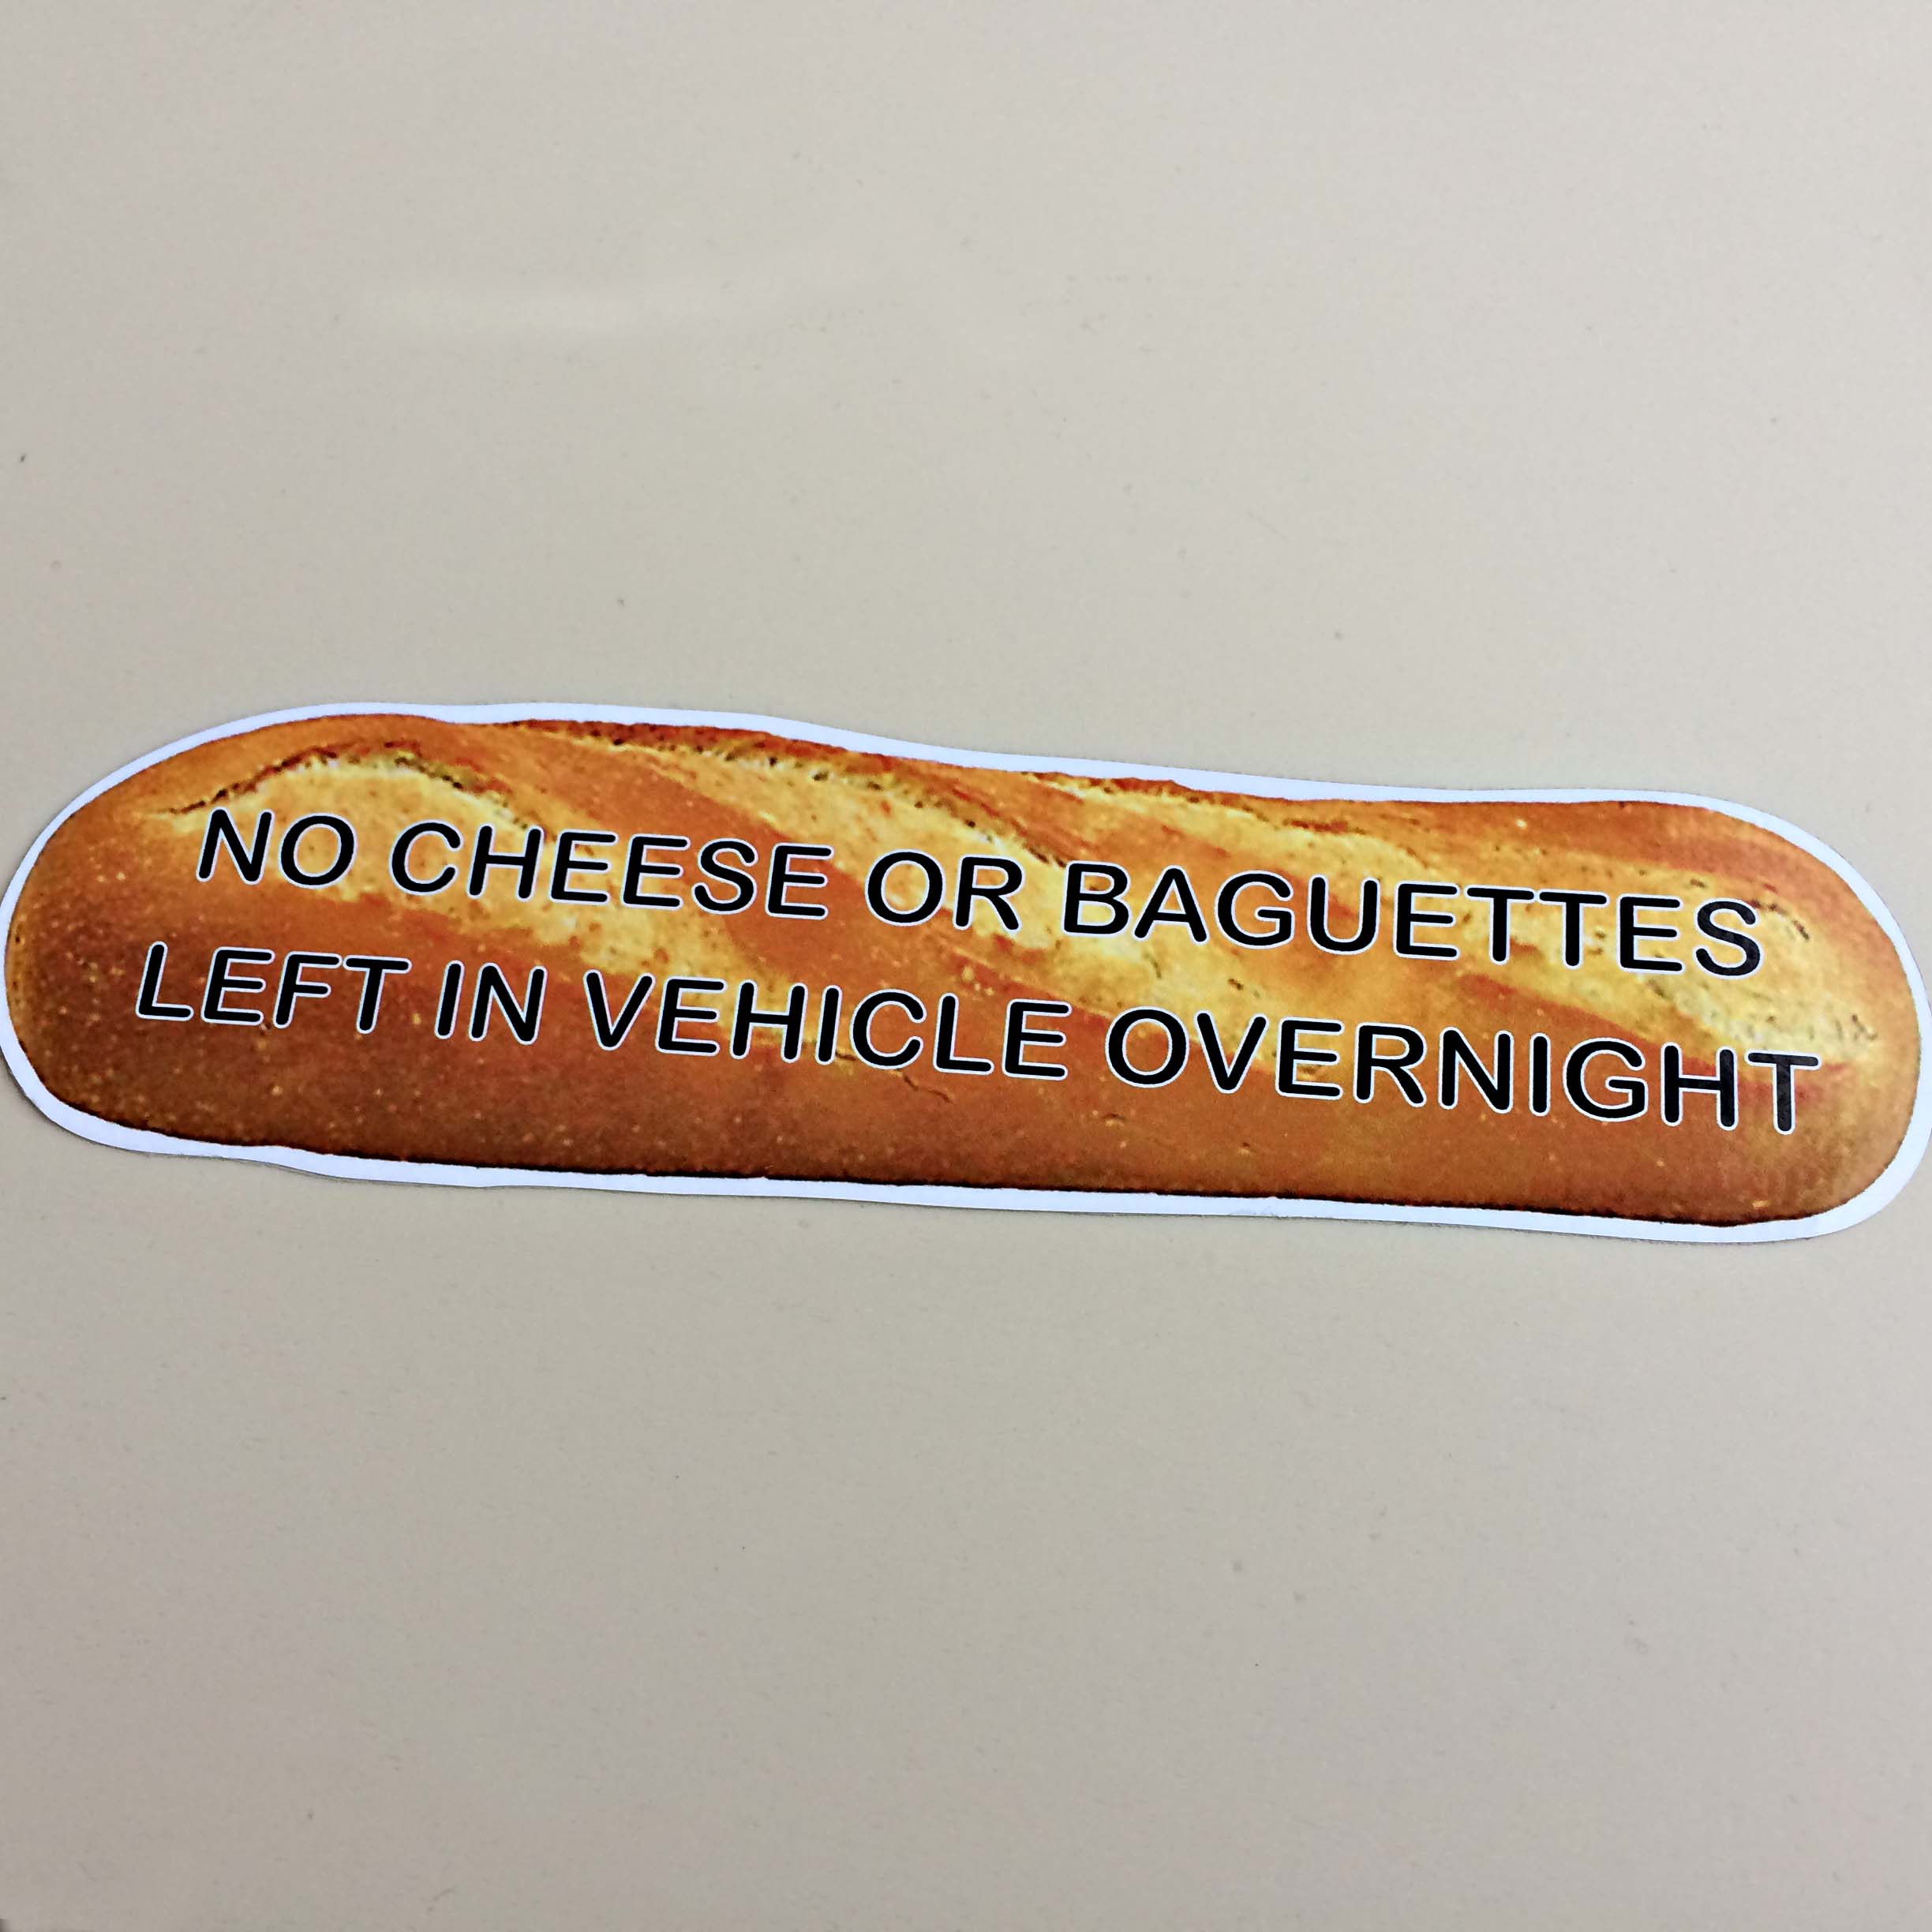 NO CHEESE OR BAGUETTES STICKER. No Cheese Or Baguettes Left In Vehicle Overnight. Black lettering on a baguette.